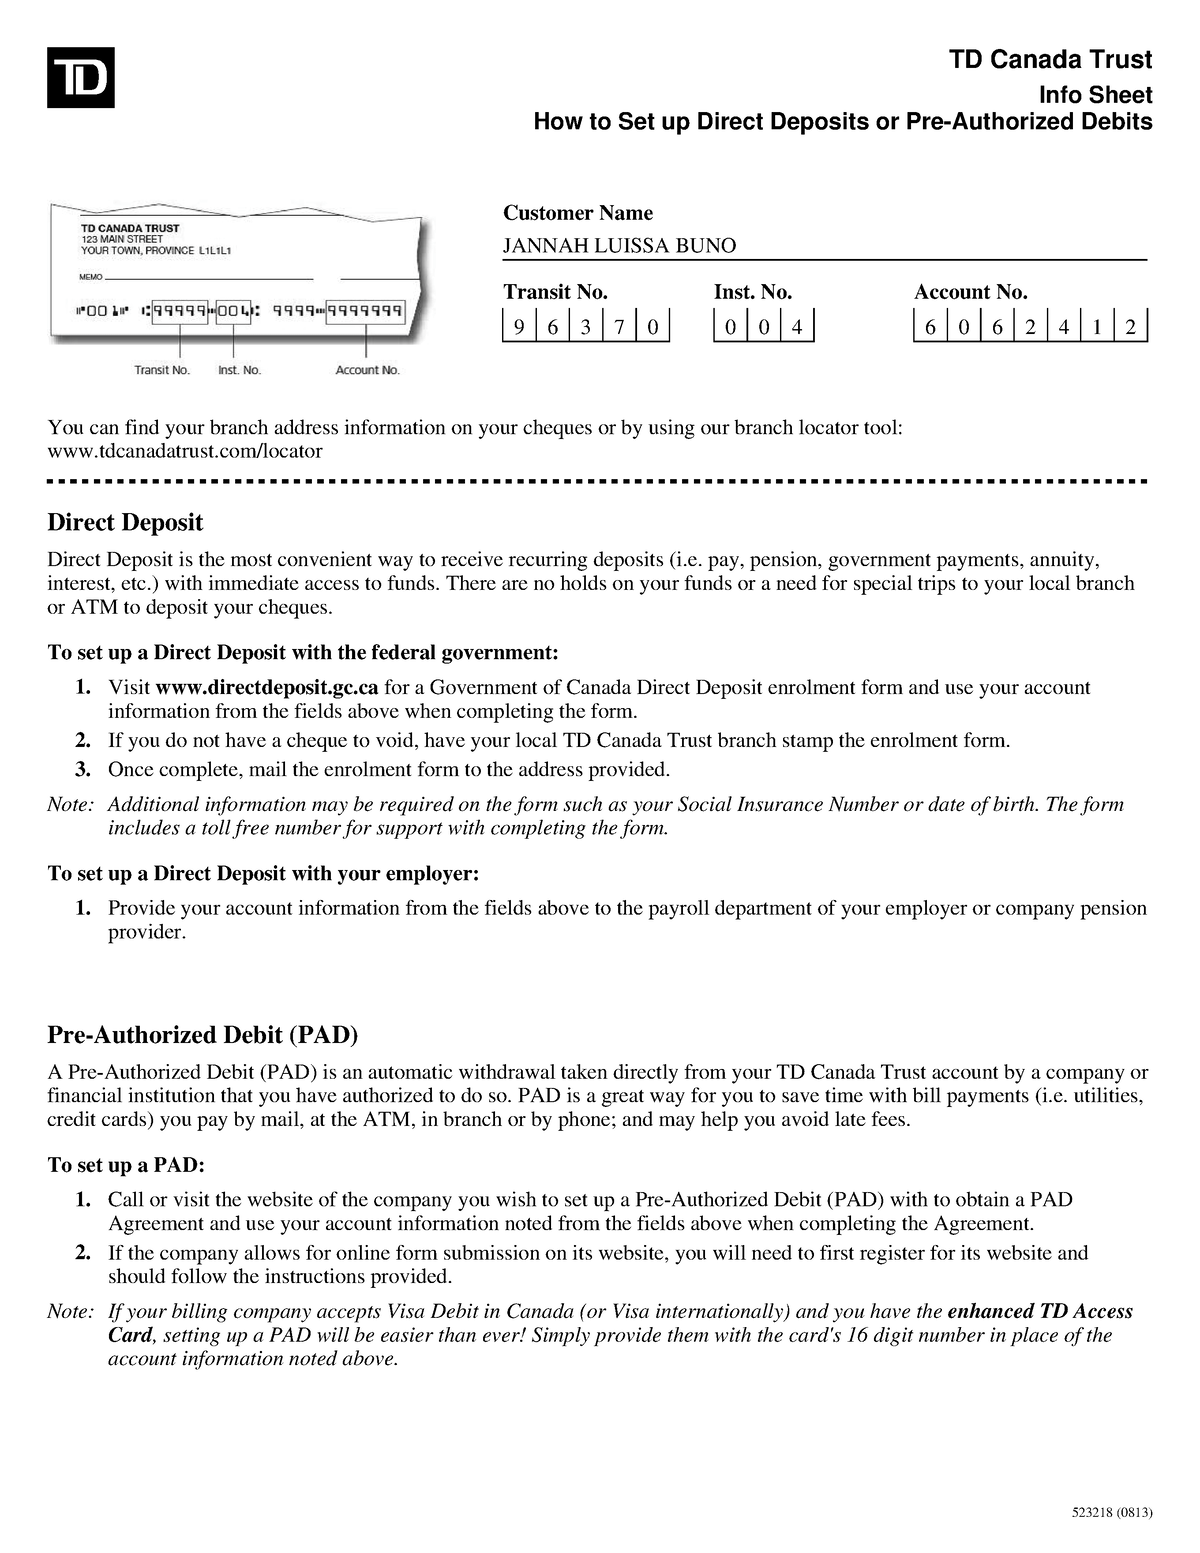 Pdf Document Td Canada Trust Info Sheet How To Set Up Direct Deposits Or Pre Authorized Debits 3331